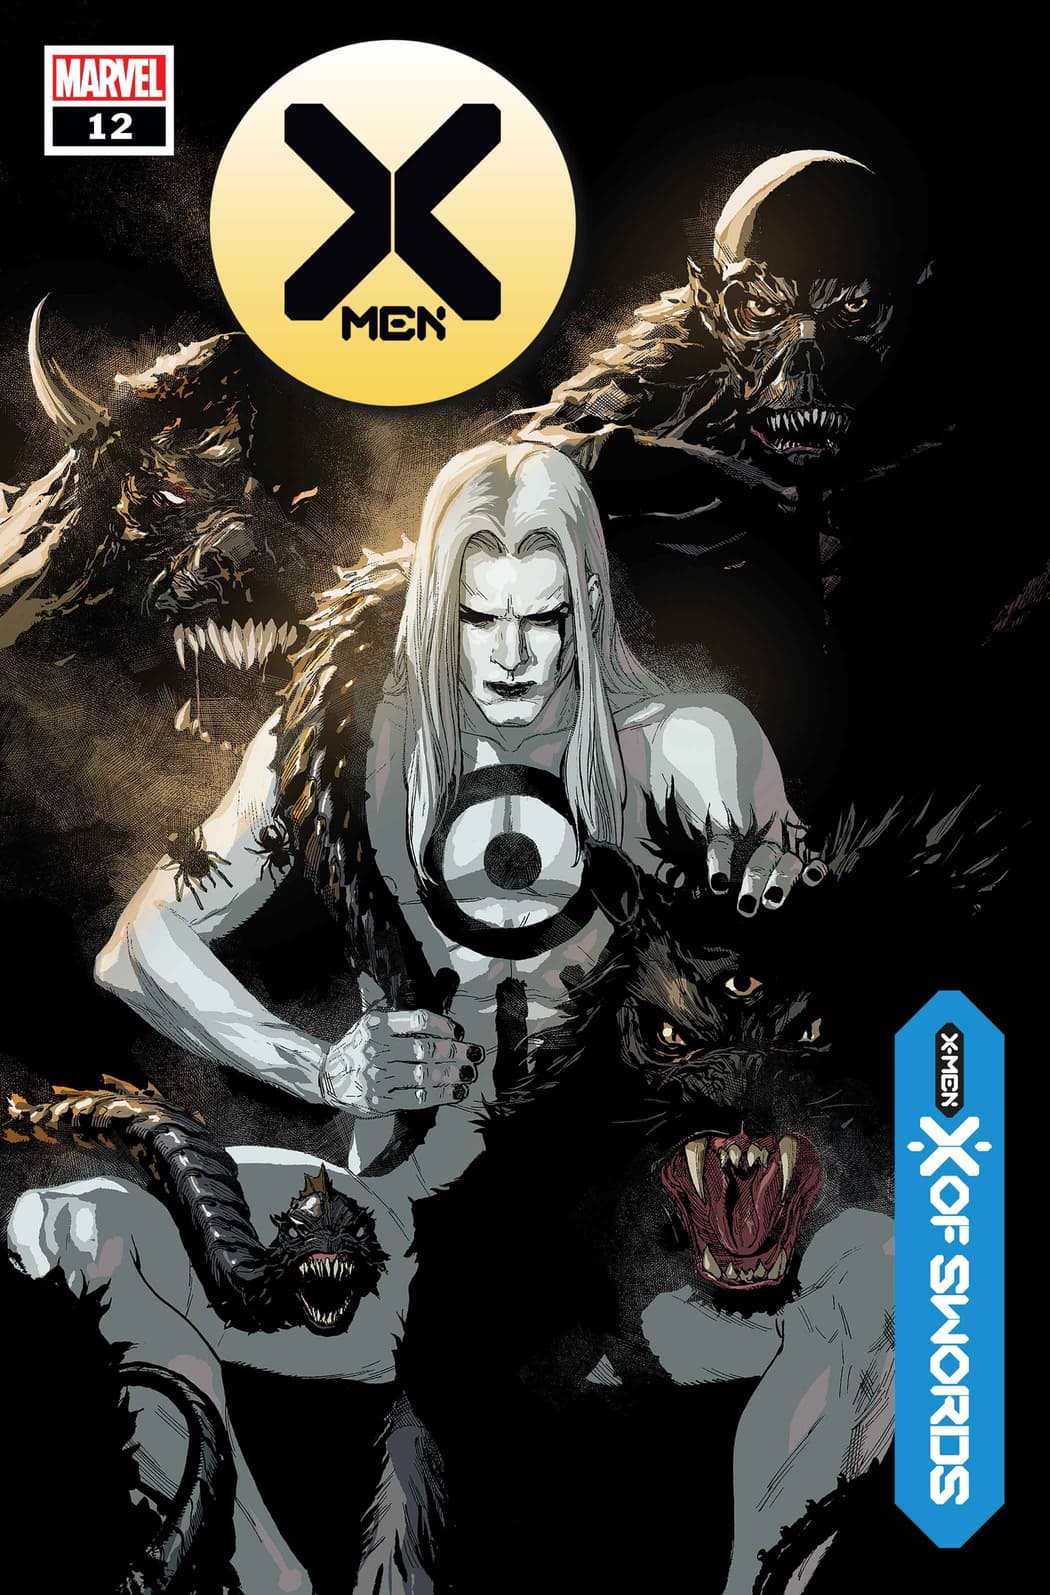 X-MEN #12 WRITTEN BY JONATHAN HICKMAN, ART AND COVER BY LEINIL FRANCIS YU